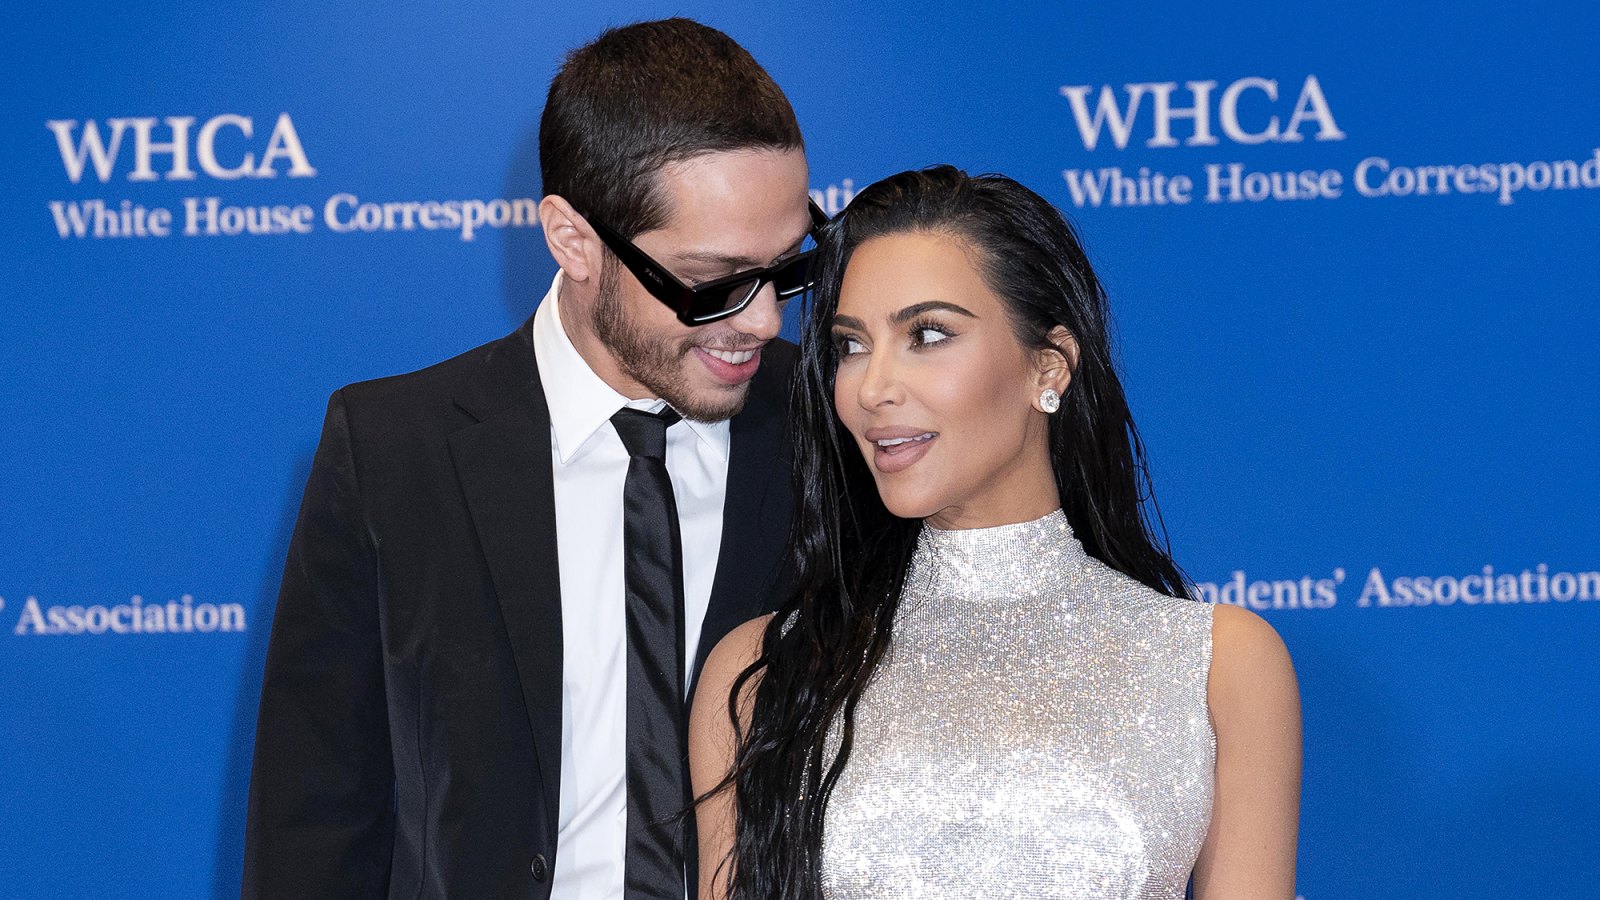 Kim Kardashian Revealed She's Open to Getting Married Again Shortly After Pete Davidson Sparks Flew: '4th Time's the Charm'